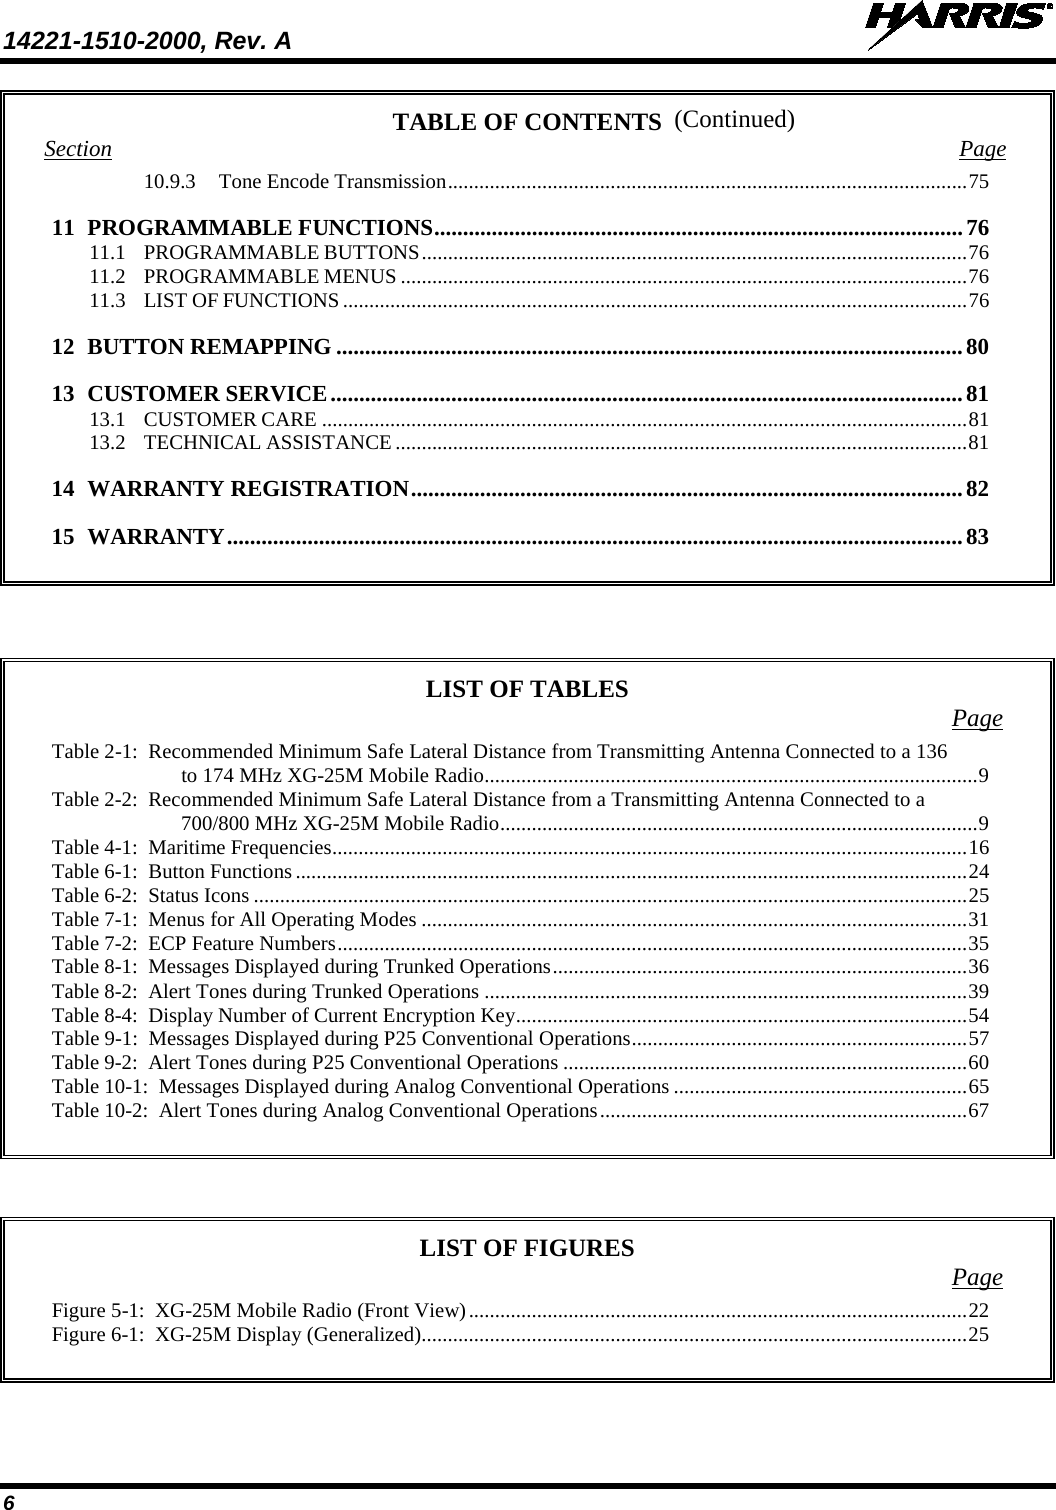 14221-1510-2000, Rev. A   6 (Continued) TABLE OF CONTENTS Section  Page 10.9.3 Tone Encode Transmission ................................................................................................... 75 11 PROGRAMMABLE FUNCTIONS ............................................................................................ 76 11.1 PROGRAMMABLE BUTTONS ........................................................................................................ 76 11.2 PROGRAMMABLE MENUS ............................................................................................................ 76 11.3 LIST OF FUNCTIONS ....................................................................................................................... 76 12 BUTTON REMAPPING ............................................................................................................. 80 13 CUSTOMER SERVICE .............................................................................................................. 81 13.1 CUSTOMER CARE ........................................................................................................................... 81 13.2 TECHNICAL ASSISTANCE ............................................................................................................. 81 14 WARRANTY REGISTRATION ................................................................................................ 82 15 WARRANTY ................................................................................................................................ 83       LIST OF TABLES Page Table 2-1:  Recommended Minimum Safe Lateral Distance from Transmitting Antenna Connected to a 136 to 174 MHz XG-25M Mobile Radio .............................................................................................. 9 Table 2-2:  Recommended Minimum Safe Lateral Distance from a Transmitting Antenna Connected to a 700/800 MHz XG-25M Mobile Radio ........................................................................................... 9 Table 4-1:  Maritime Frequencies ......................................................................................................................... 16 Table 6-1:  Button Functions ................................................................................................................................ 24 Table 6-2:  Status Icons ........................................................................................................................................ 25 Table 7-1:  Menus for All Operating Modes ........................................................................................................ 31 Table 7-2:  ECP Feature Numbers ........................................................................................................................ 35 Table 8-1:  Messages Displayed during Trunked Operations ............................................................................... 36 Table 8-2:  Alert Tones during Trunked Operations ............................................................................................ 39 Table 8-4:  Display Number of Current Encryption Key ...................................................................................... 54 Table 9-1:  Messages Displayed during P25 Conventional Operations ................................................................ 57 Table 9-2:  Alert Tones during P25 Conventional Operations ............................................................................. 60 Table 10-1:  Messages Displayed during Analog Conventional Operations ........................................................ 65 Table 10-2:  Alert Tones during Analog Conventional Operations ...................................................................... 67      LIST OF FIGURES Page Figure 5-1:  XG-25M Mobile Radio (Front View) ............................................................................................... 22 Figure 6-1:  XG-25M Display (Generalized)........................................................................................................ 25   